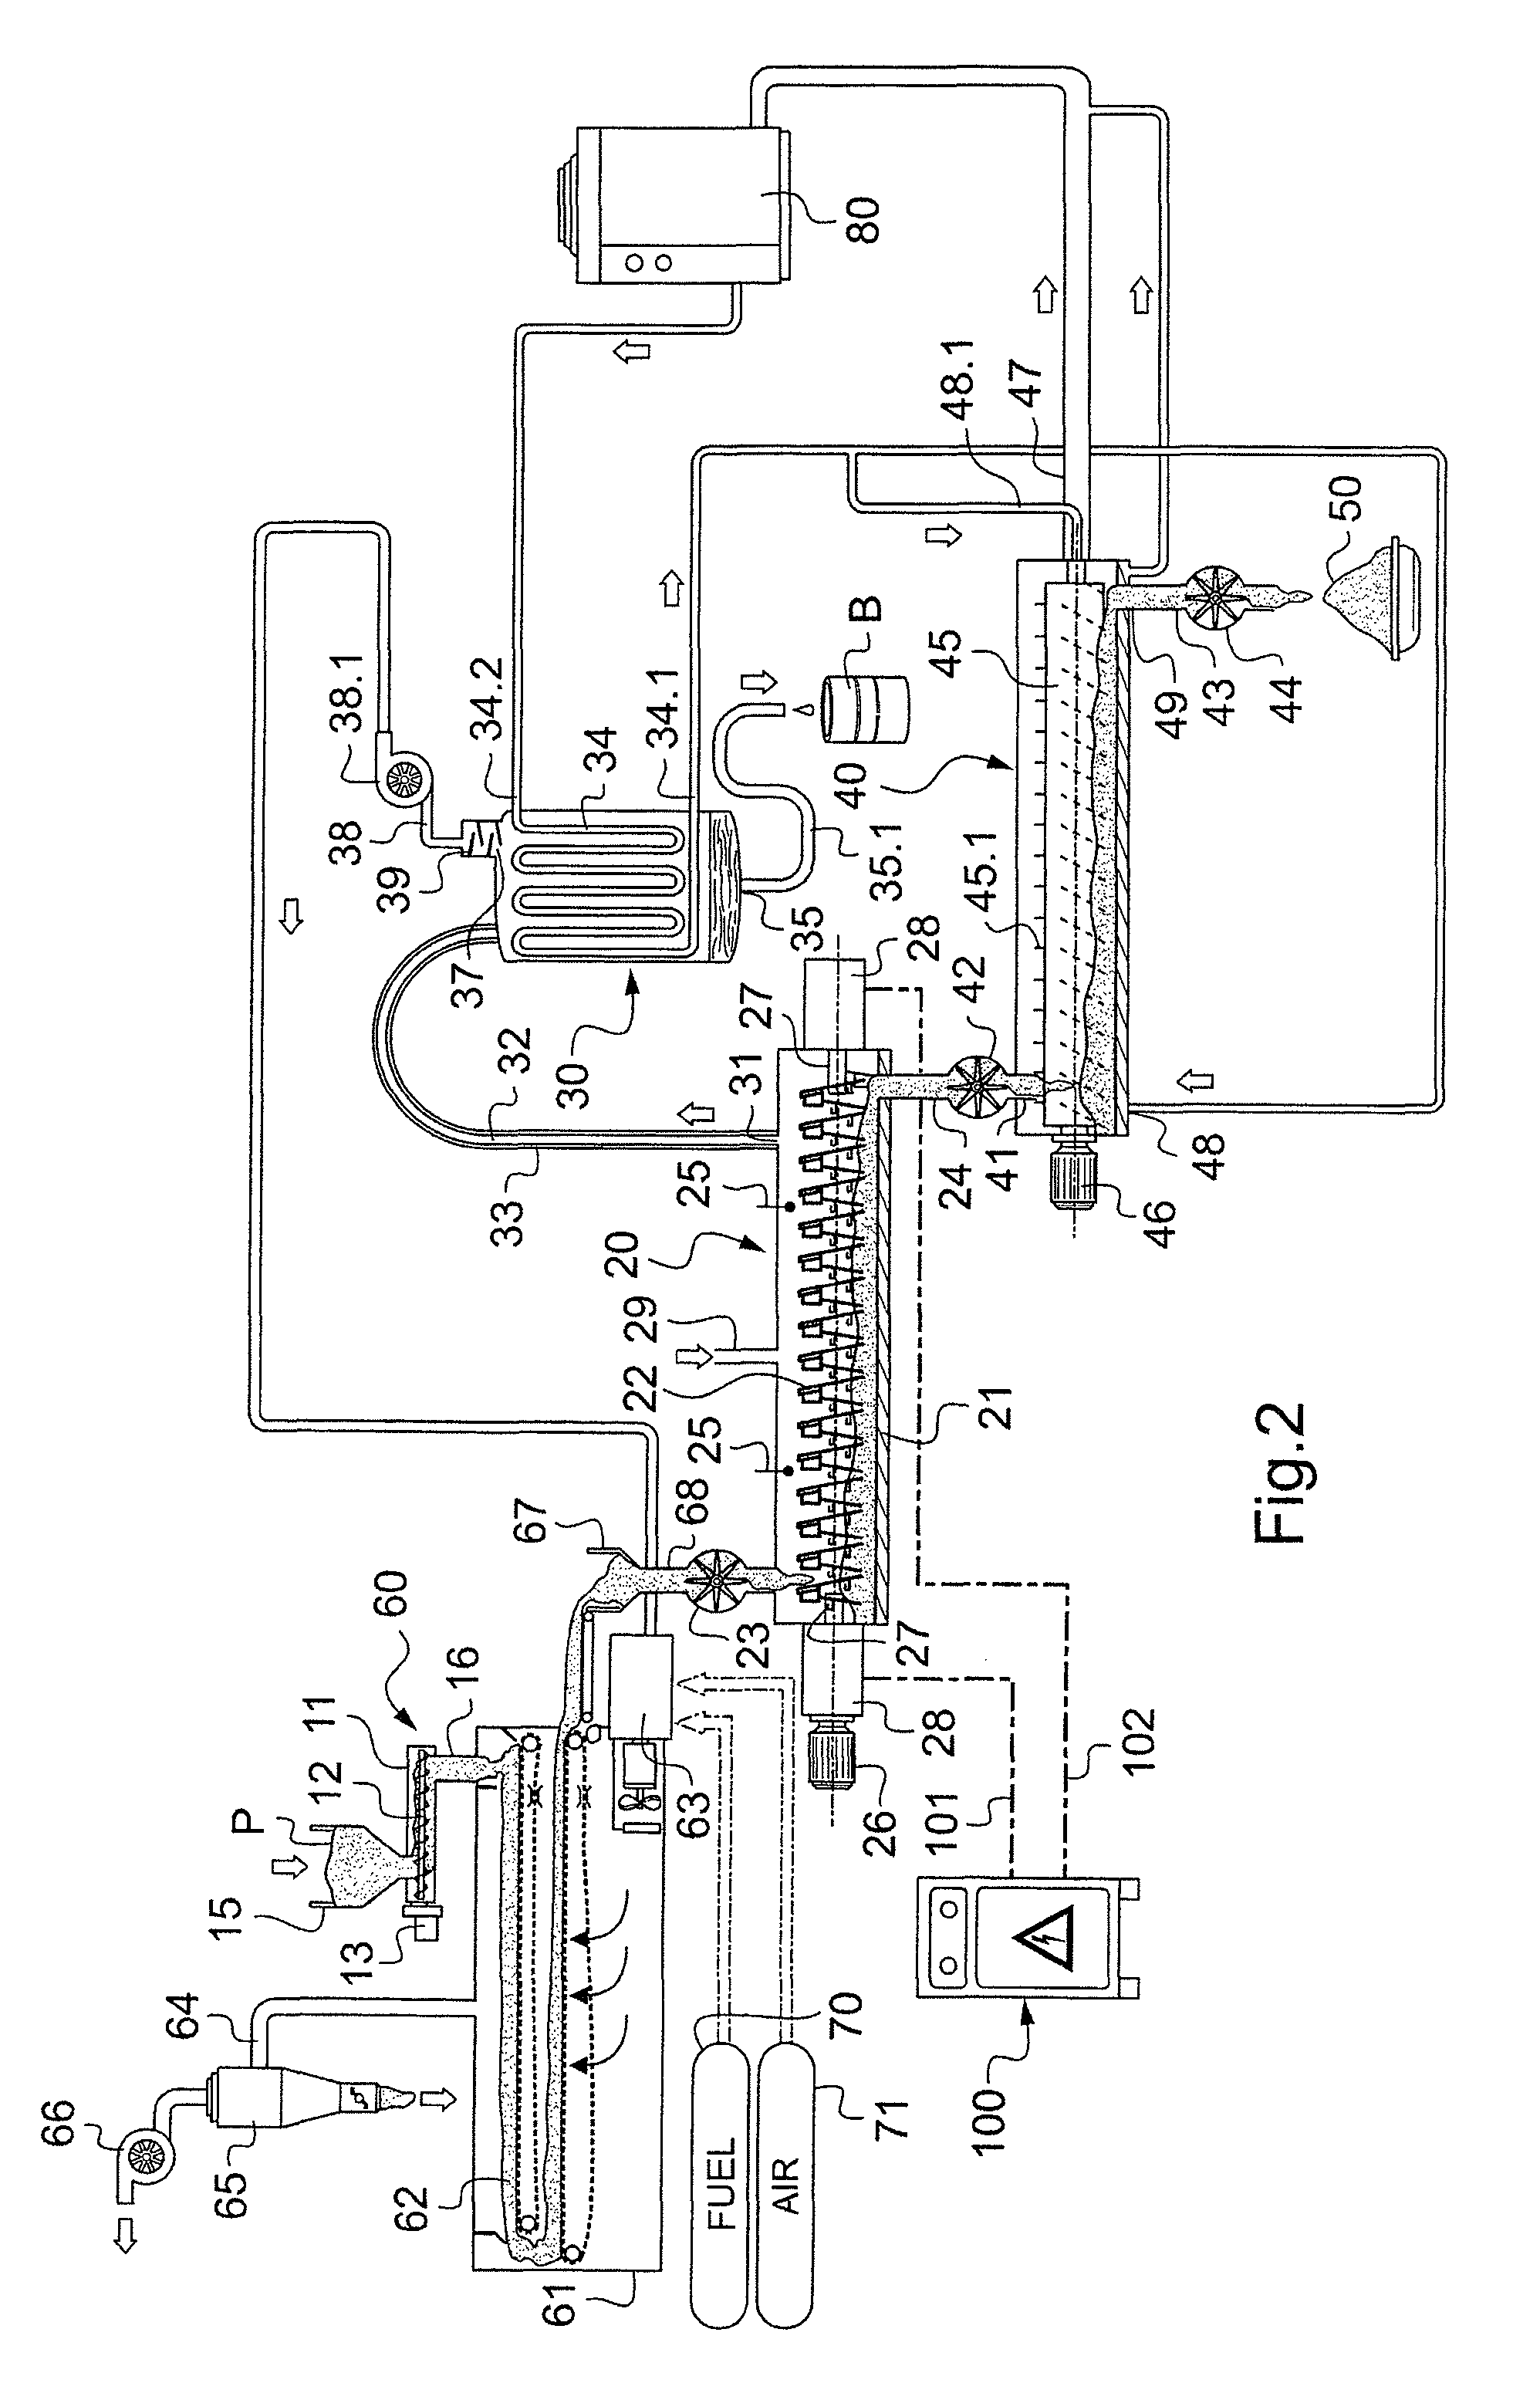 Method and apparatus for the energy densification of a material in the form of divided solids, with a view to obtaining pyrolysis oils for energy purposes